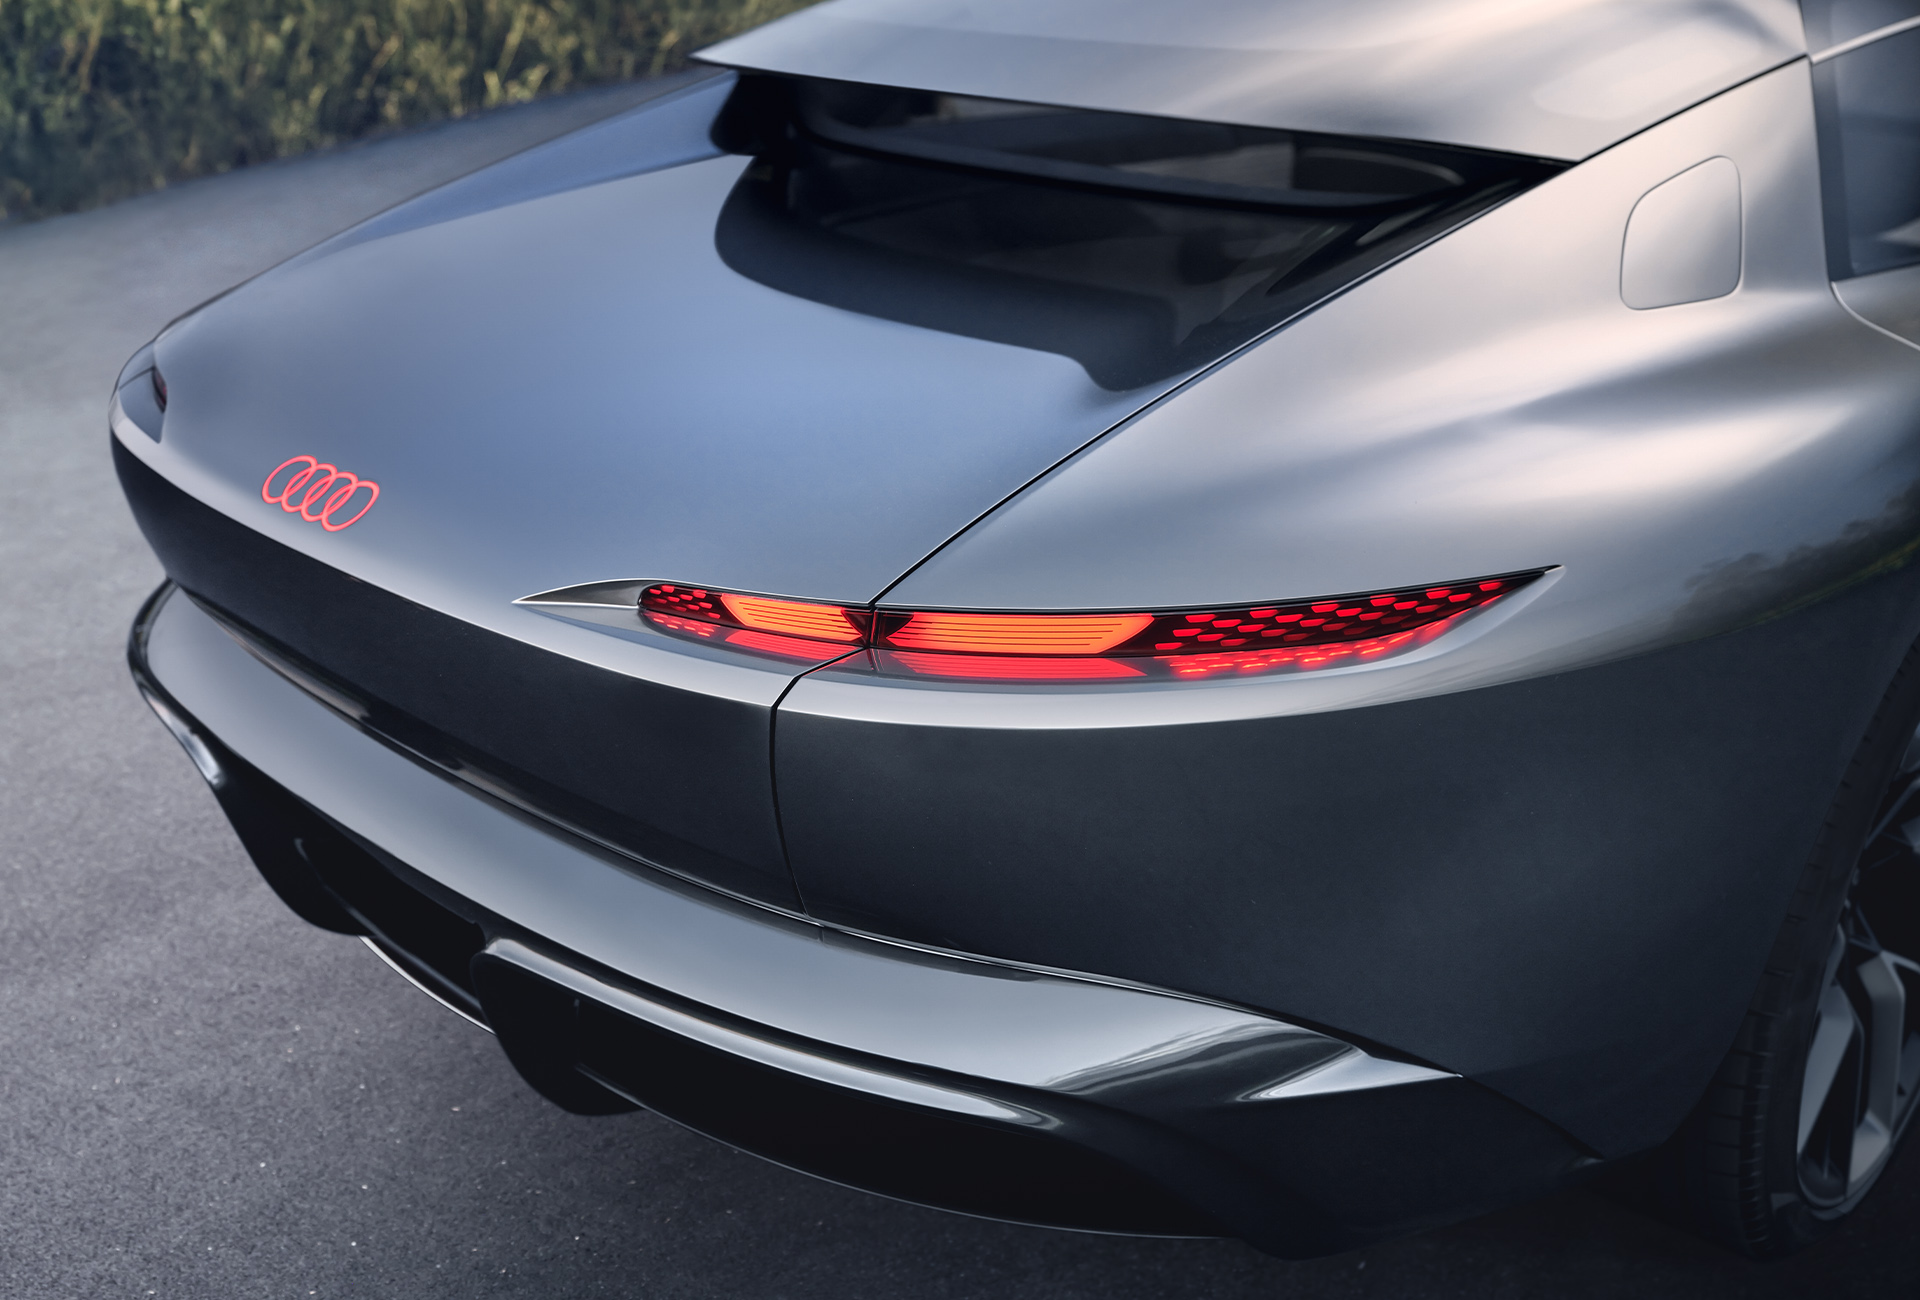 The rear of the Audi grandsphere concept.